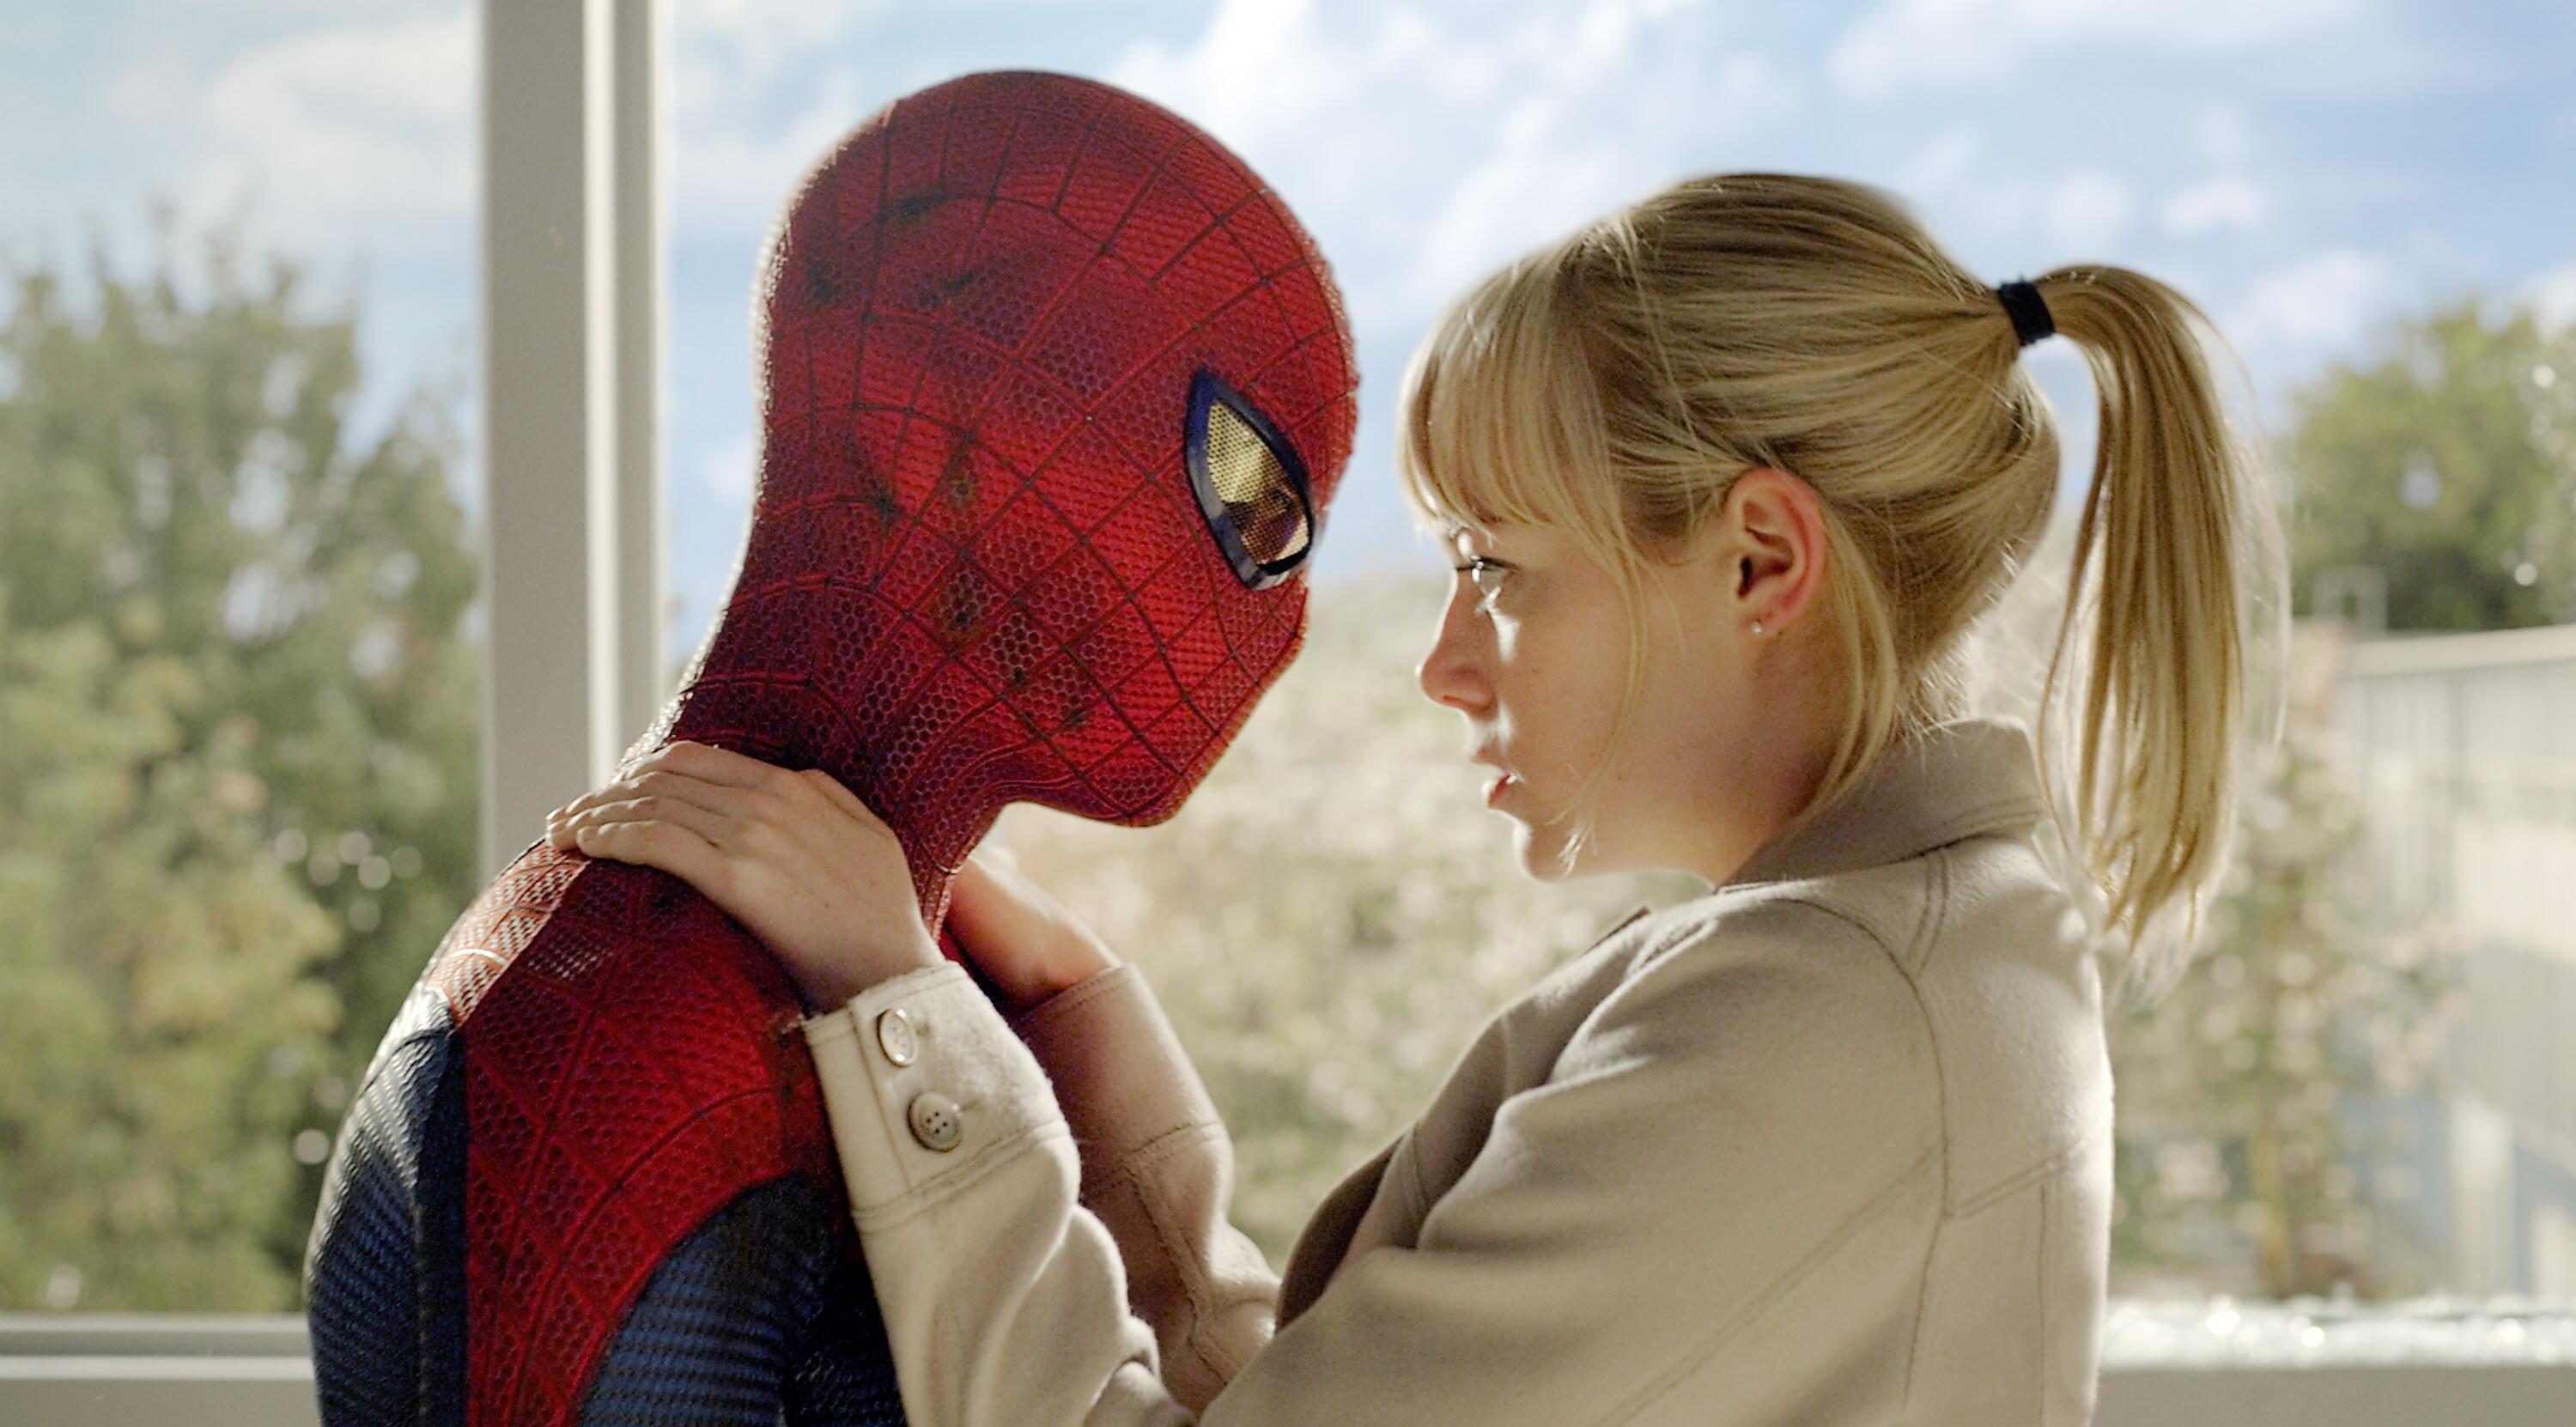 Spider-Man (Andrew Garfield) left and Gwen Stacy (Emma Stone) in "The Amazing Spider-Man" (2012)